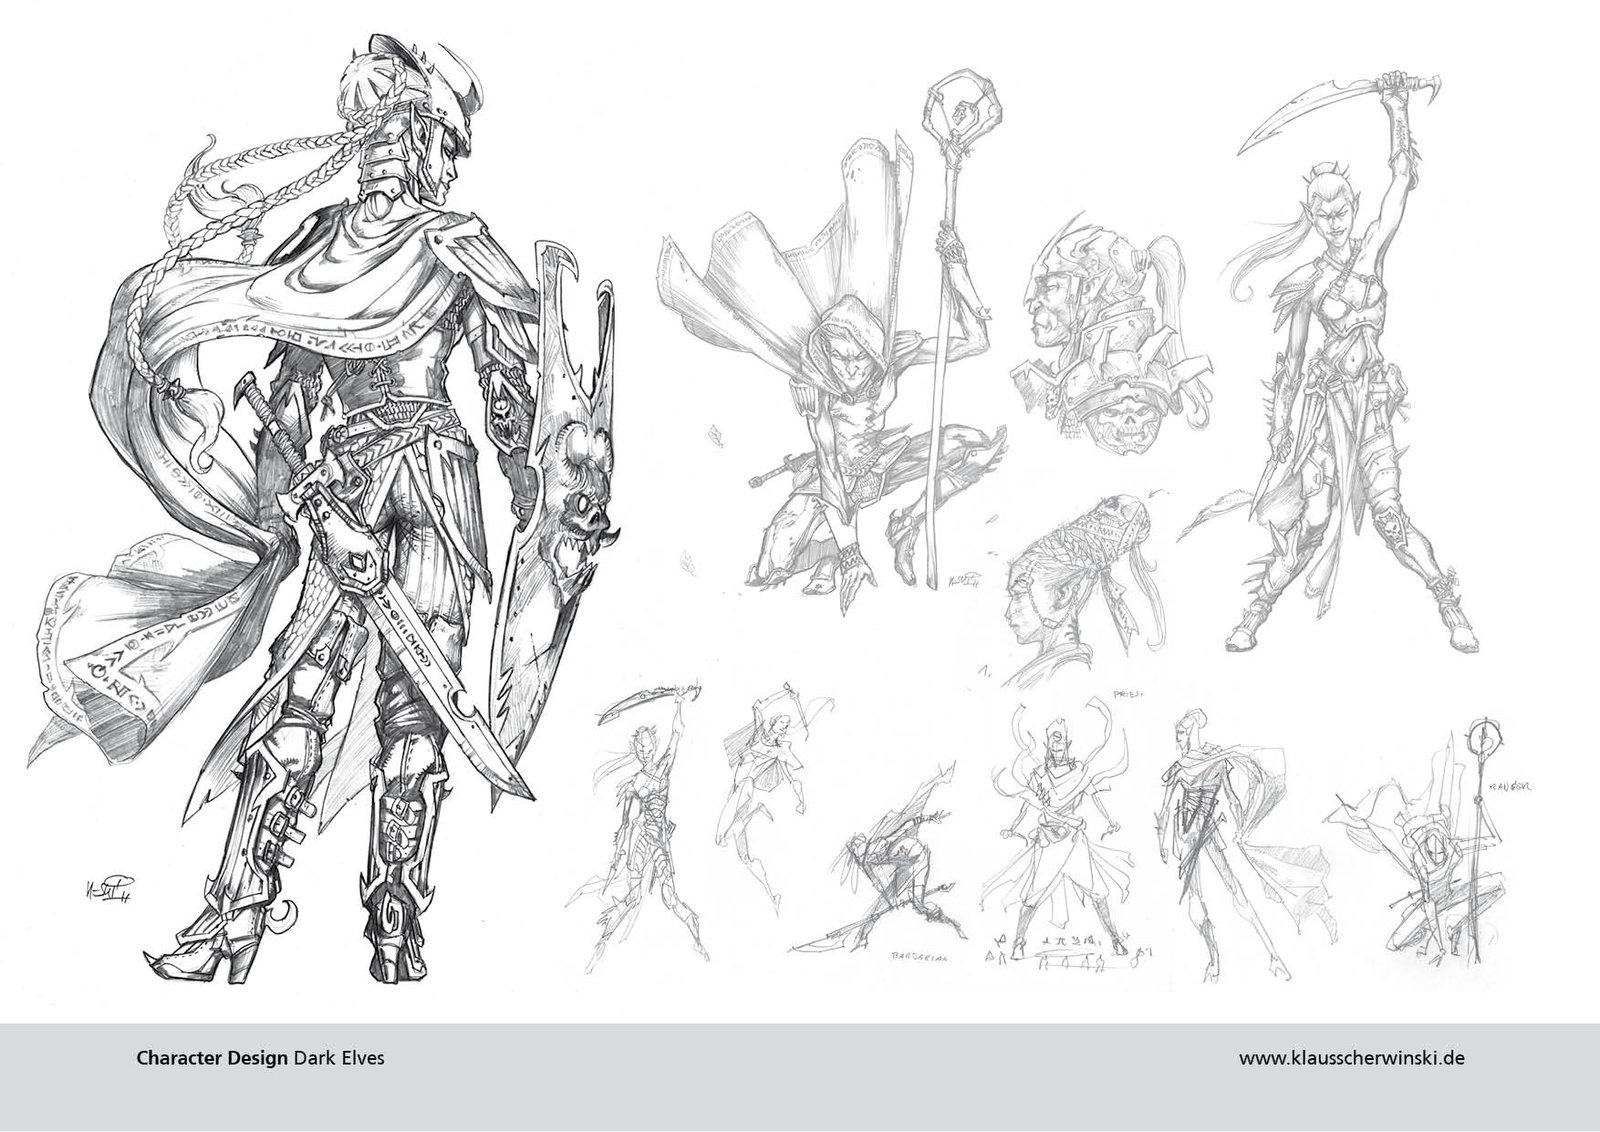 Pencils for "Drow" illustrations, for the Pathfinder RPG.